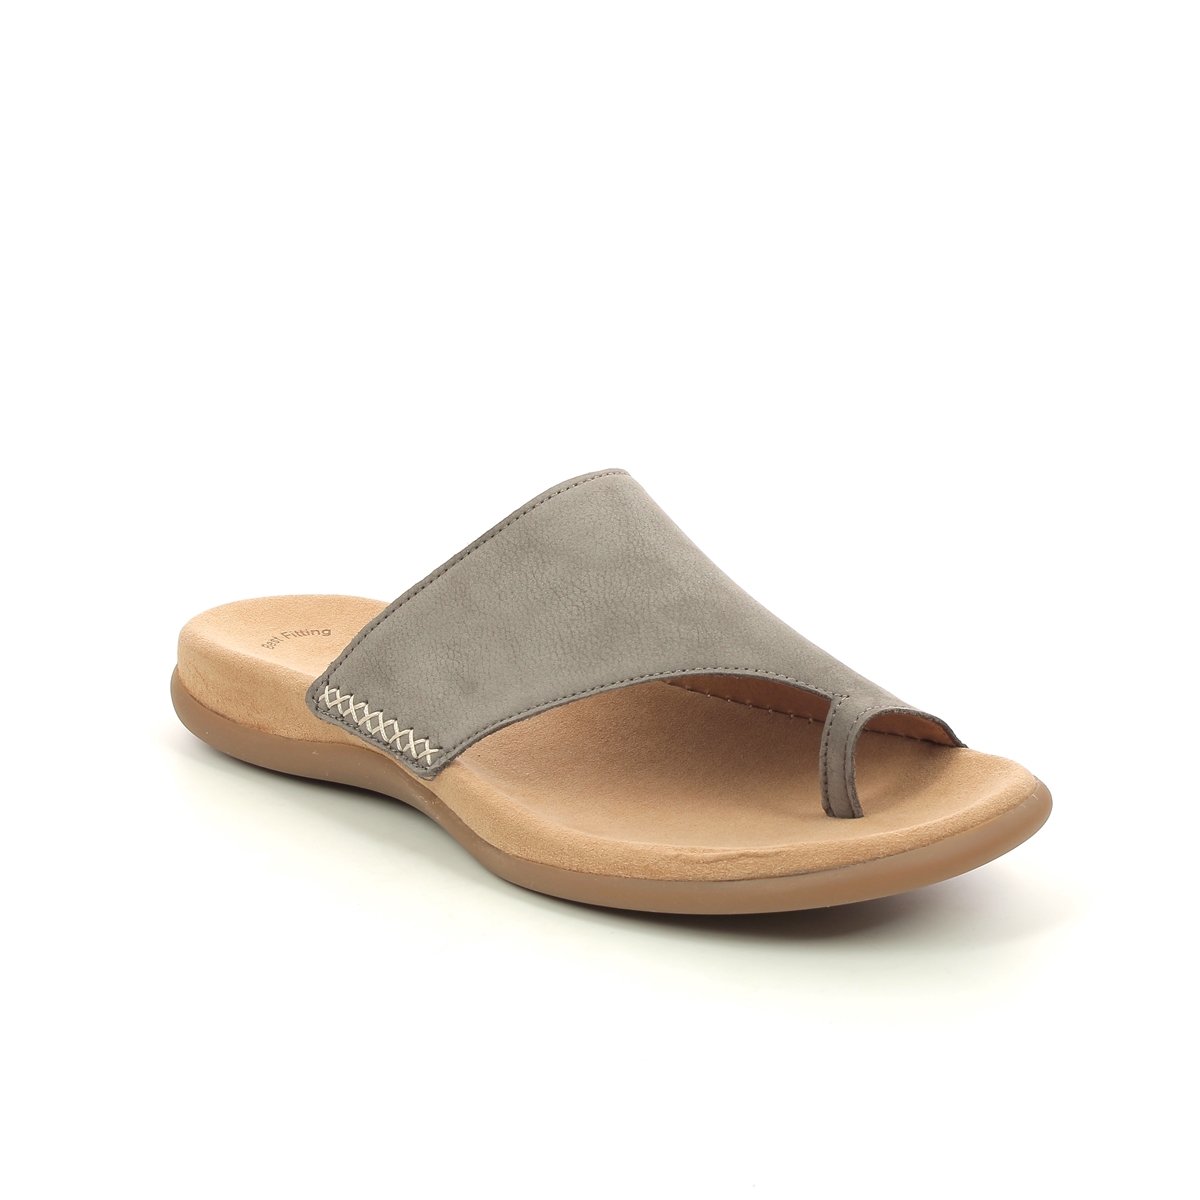 Gabor Lanzarote Taupe Nubuck Womens Toe Post Sandals 03.700.13 In Size 42 In Plain Taupe Nubuck  Womens Comfortable Sandals In Soft Taupe Nubuck Leath